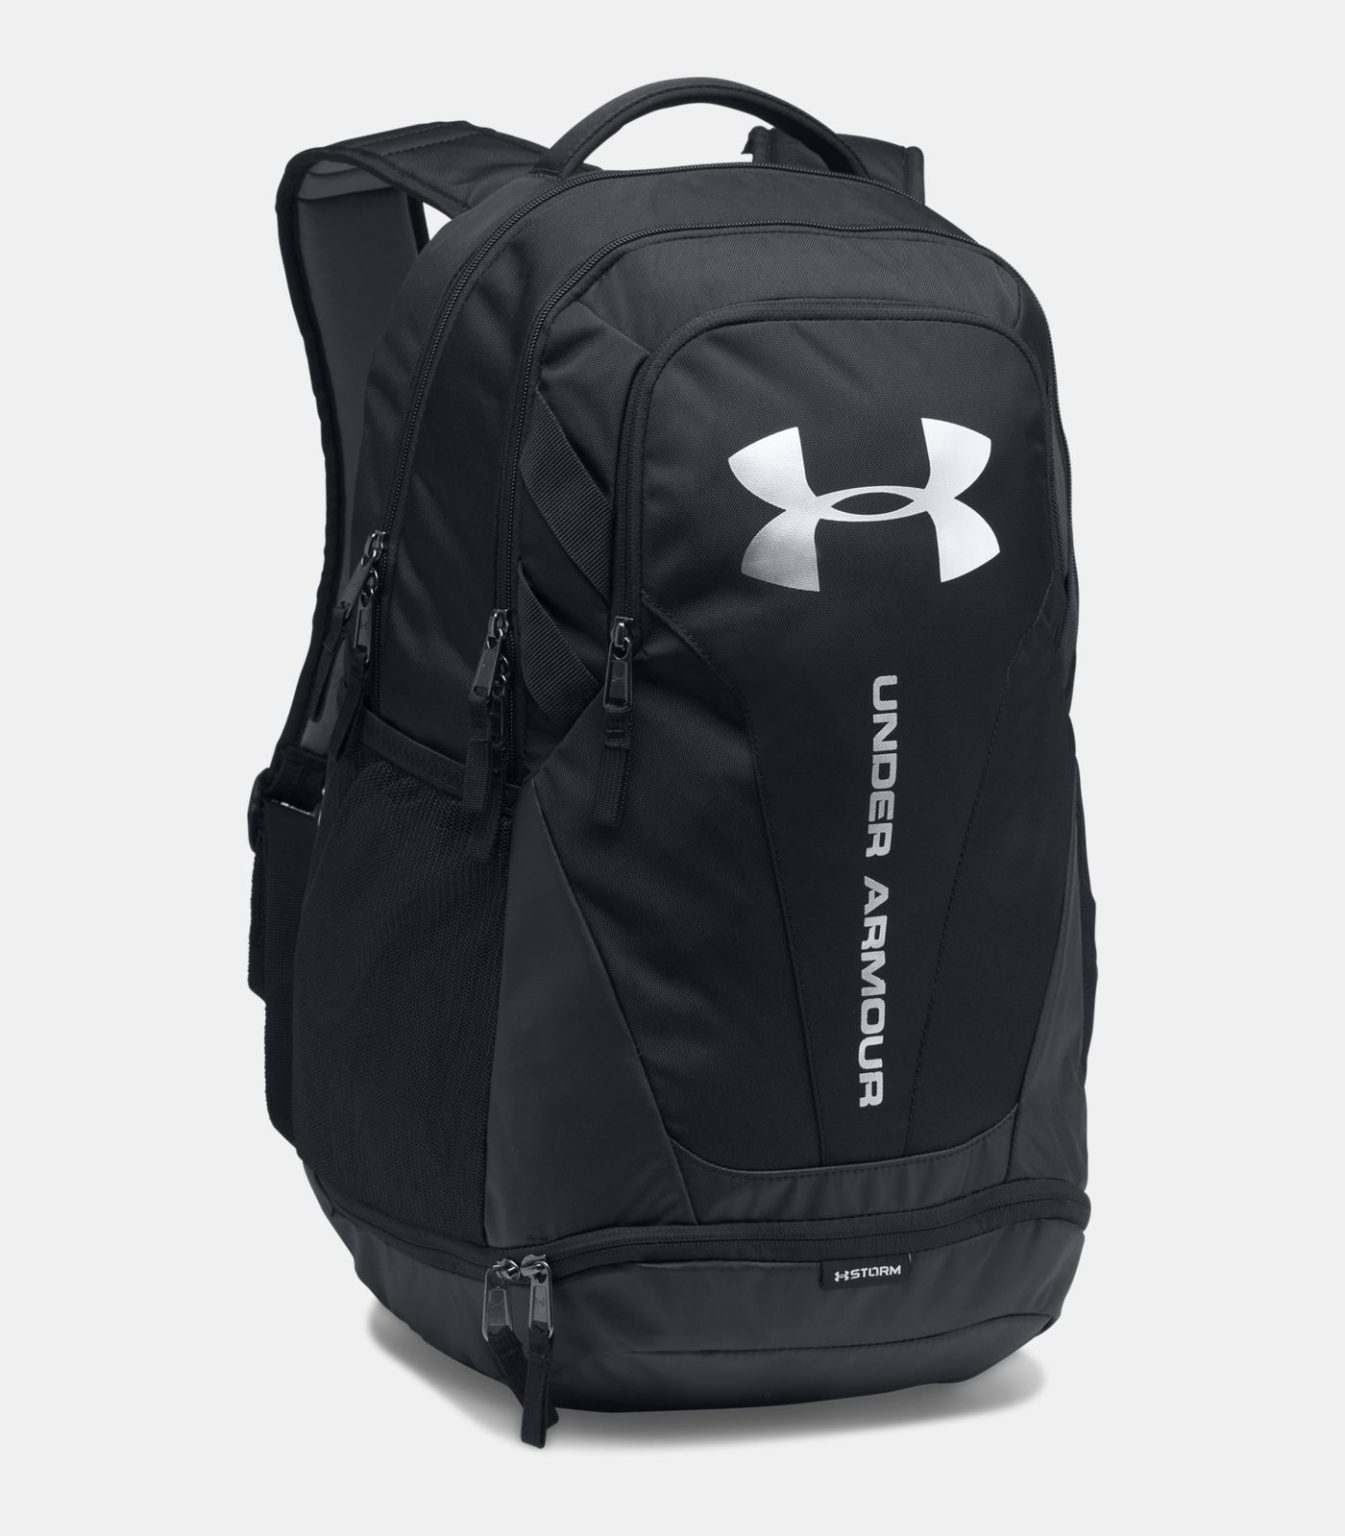 CM's 10 Best Backpacks for College ⋆ College Magazine